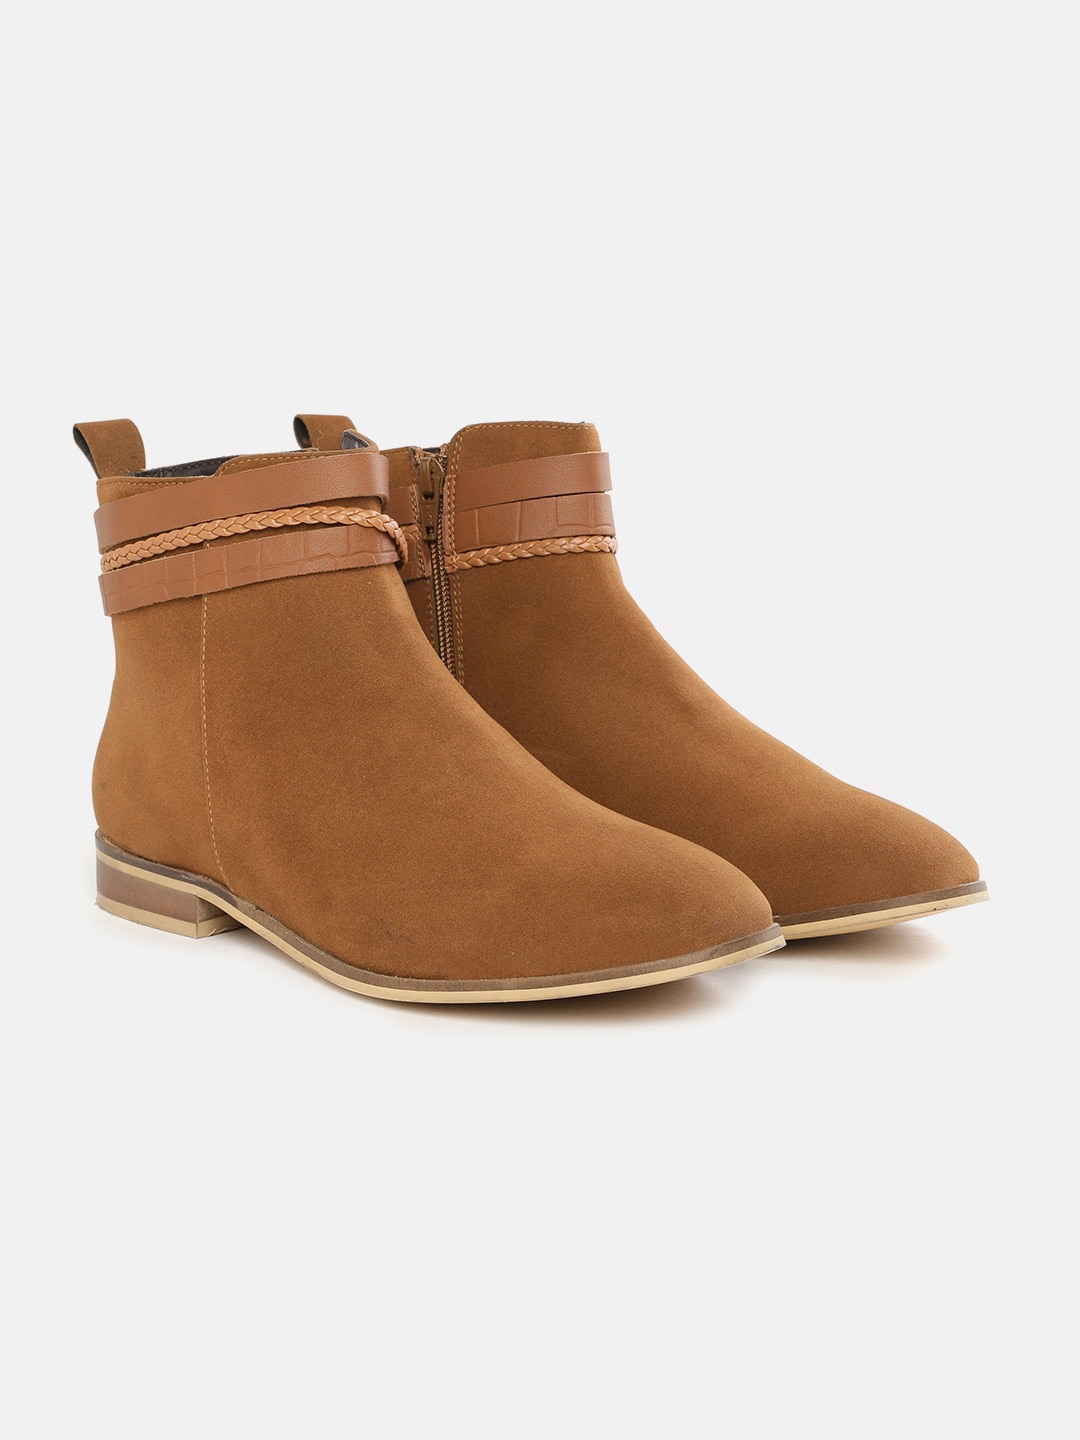 DressBerry Women Tan Solid Flat Boots Price in India